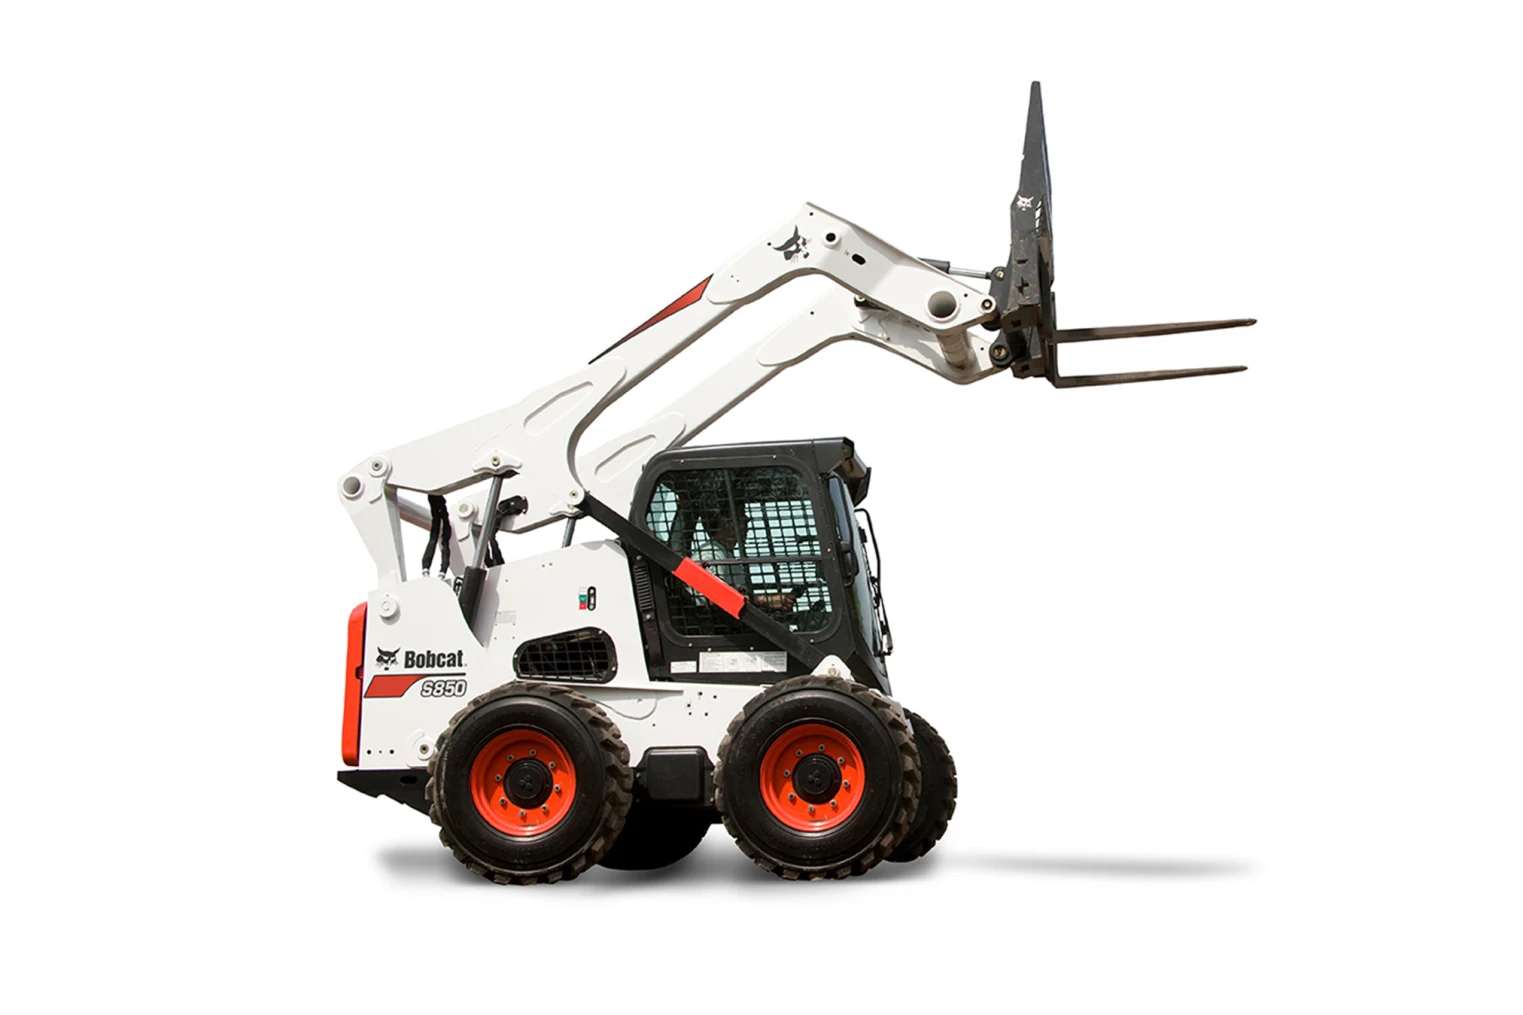 Browse Specs and more for the Bobcat S850 Skid-Steer Loader - White Star Machinery